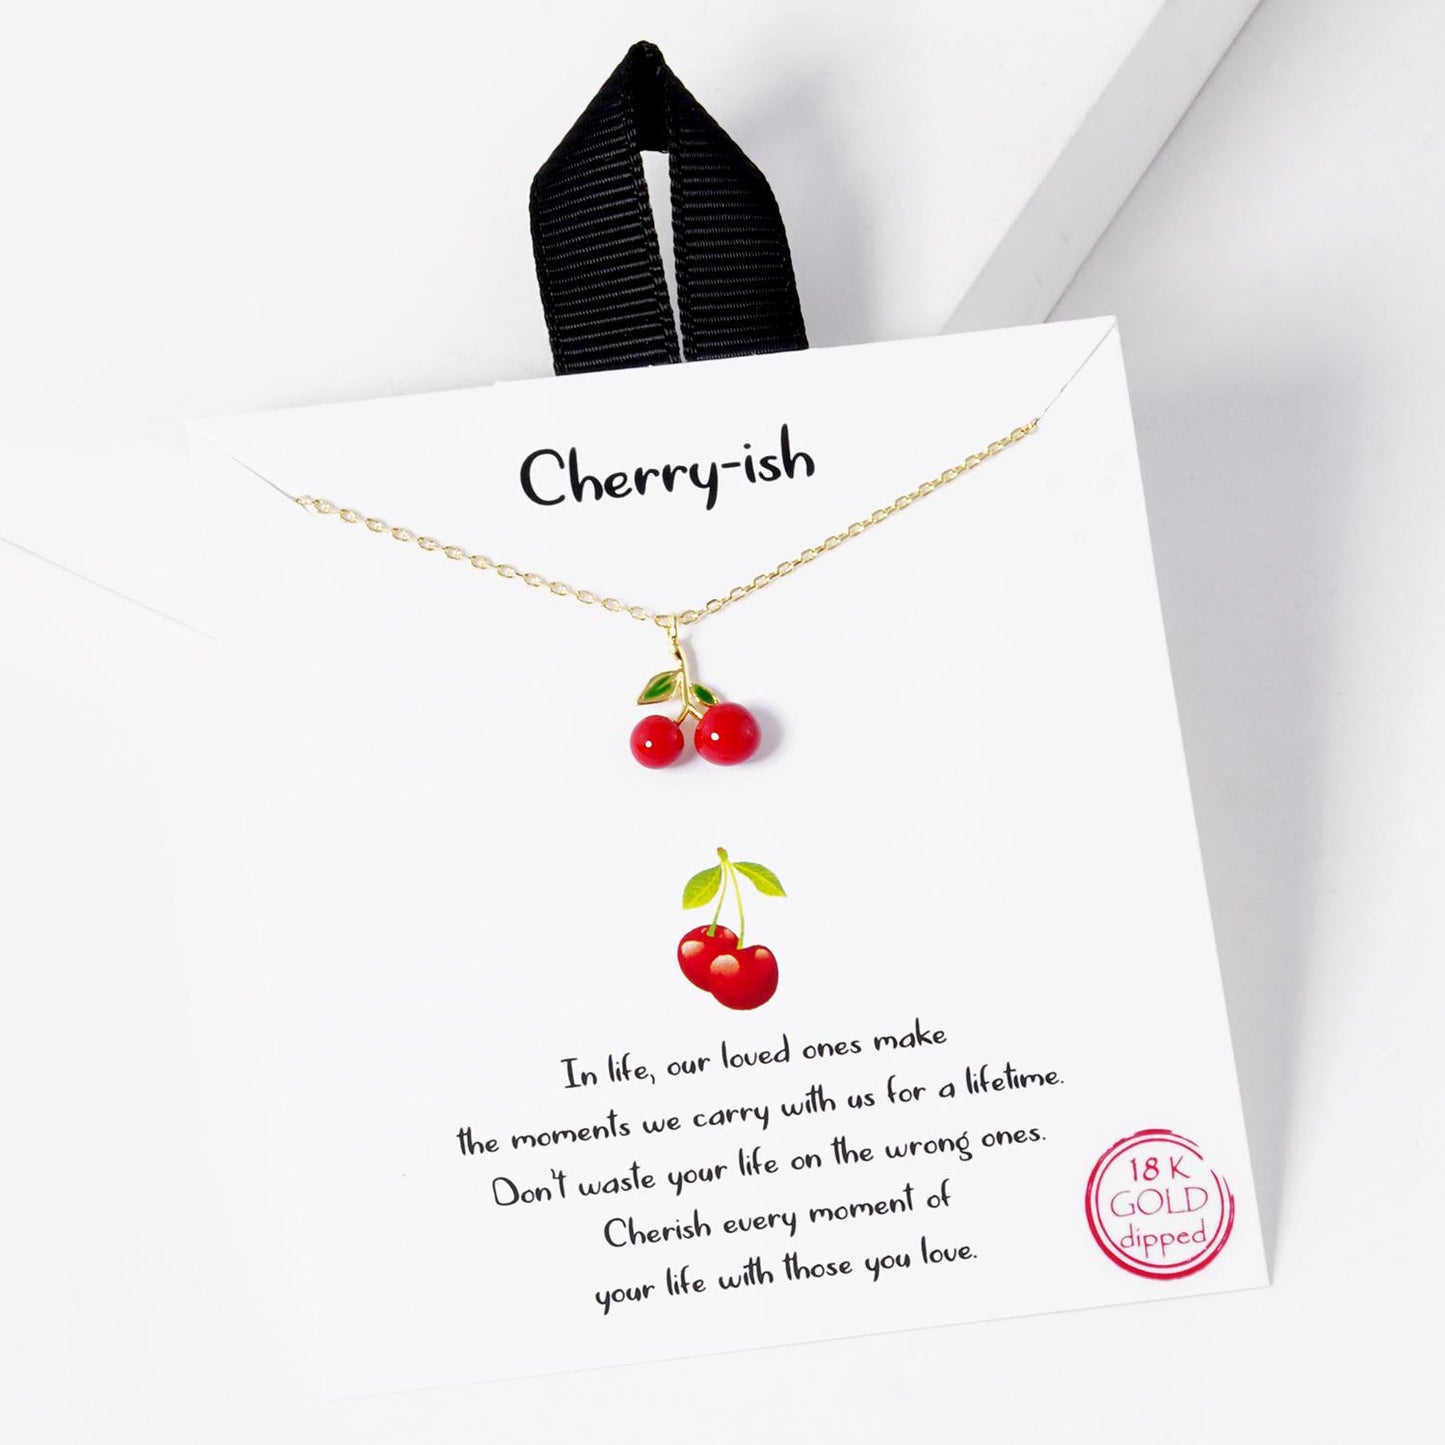 Cherry-ish Gold Necklace